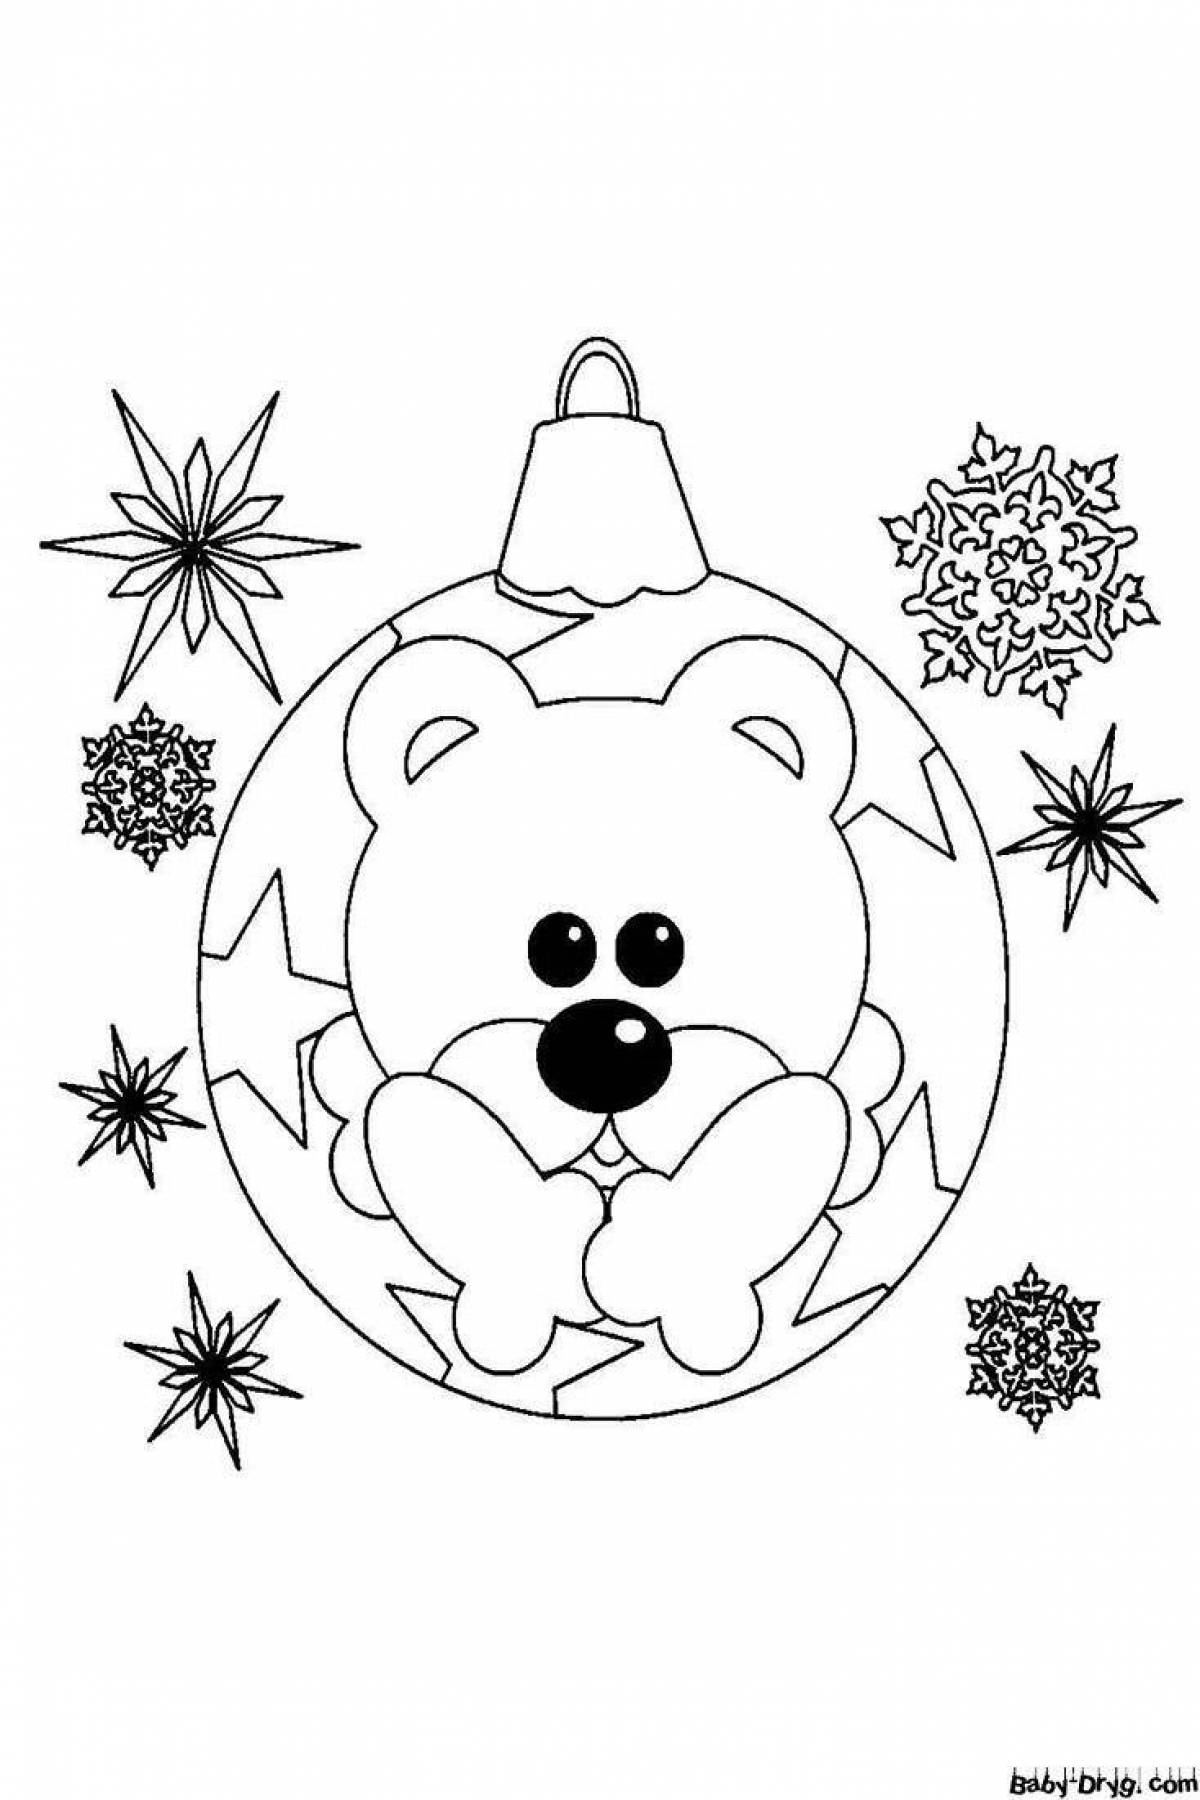 Playfilled coloring page christmas little pictures